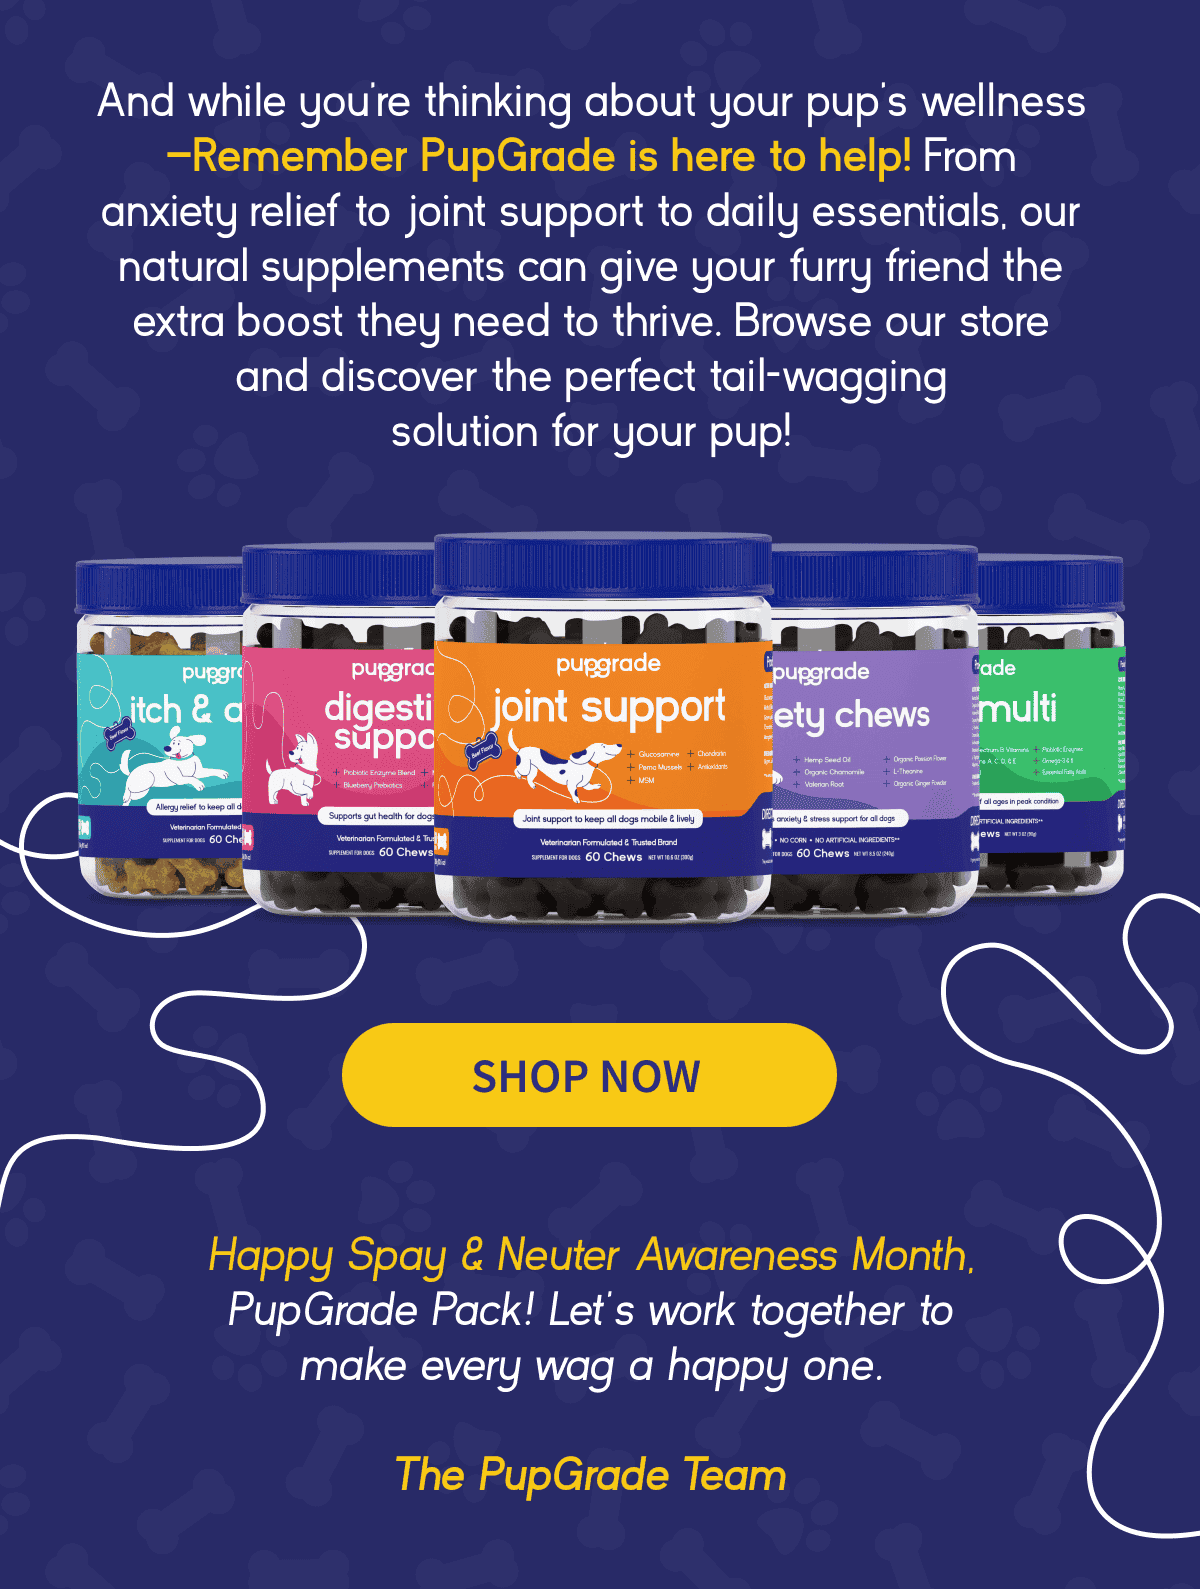 PupGrade is here to help!